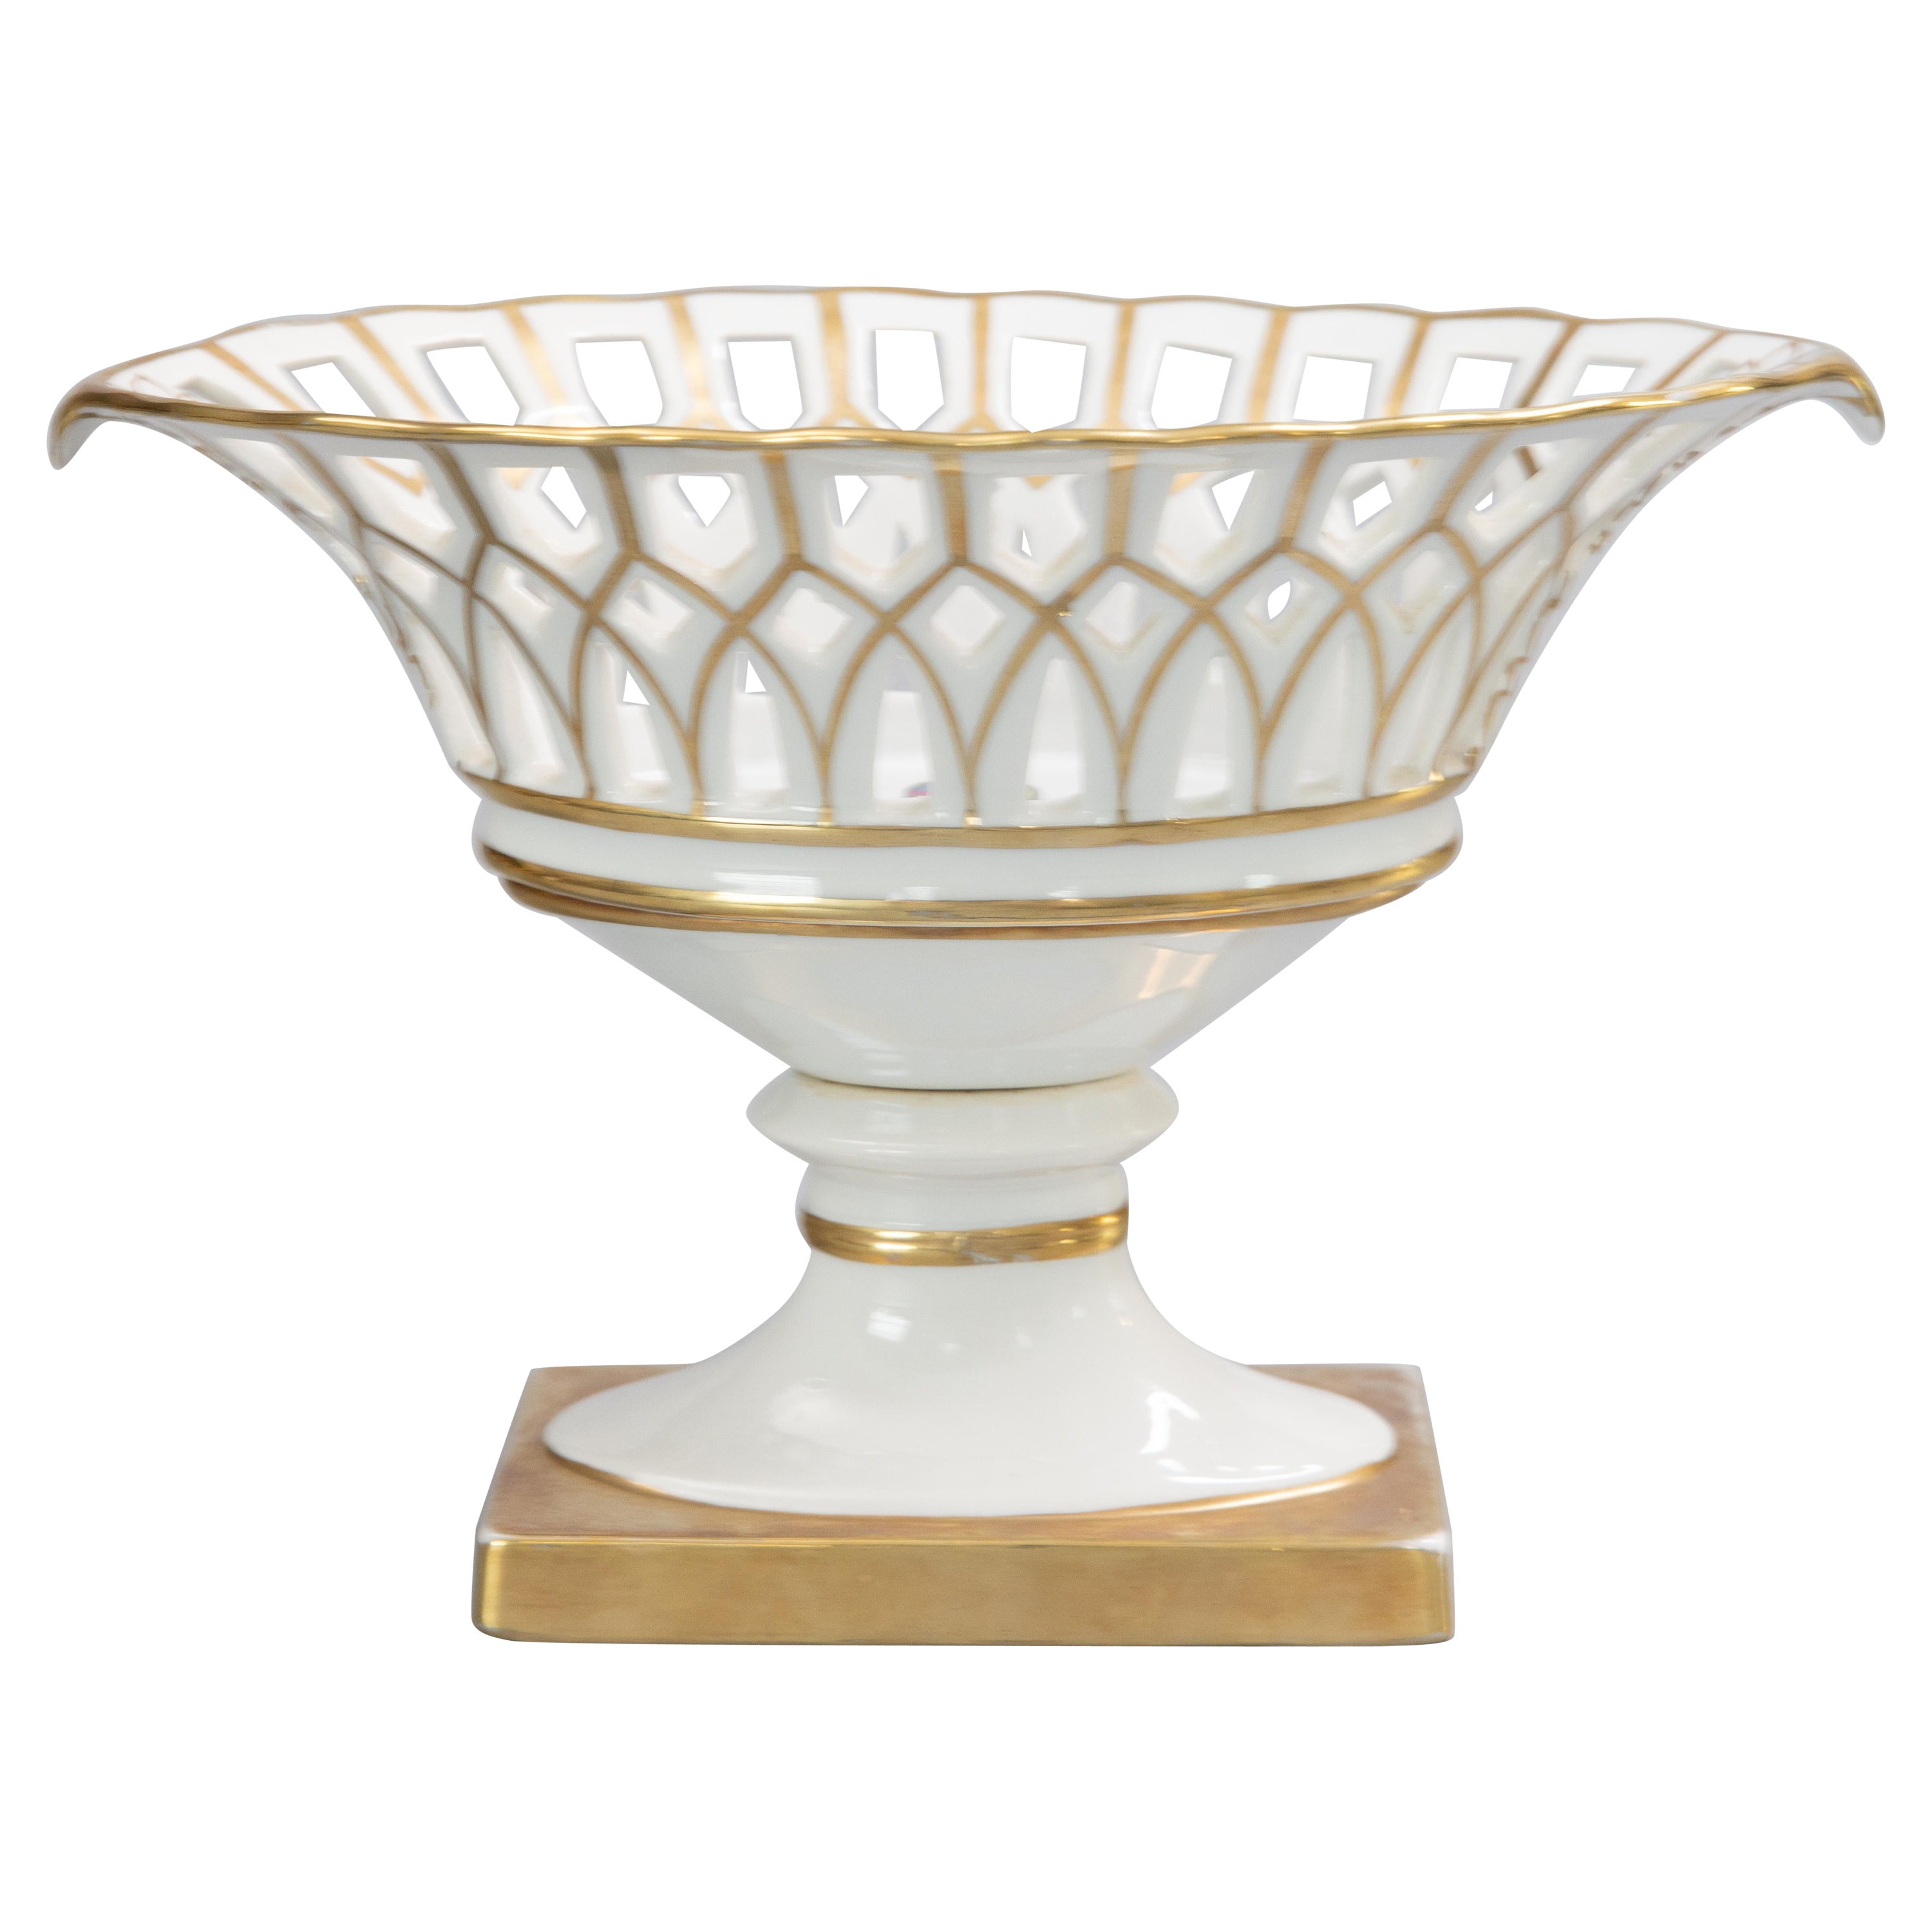 French Old Paris Gilt Porcelain Reticulated Compote, circa 1950